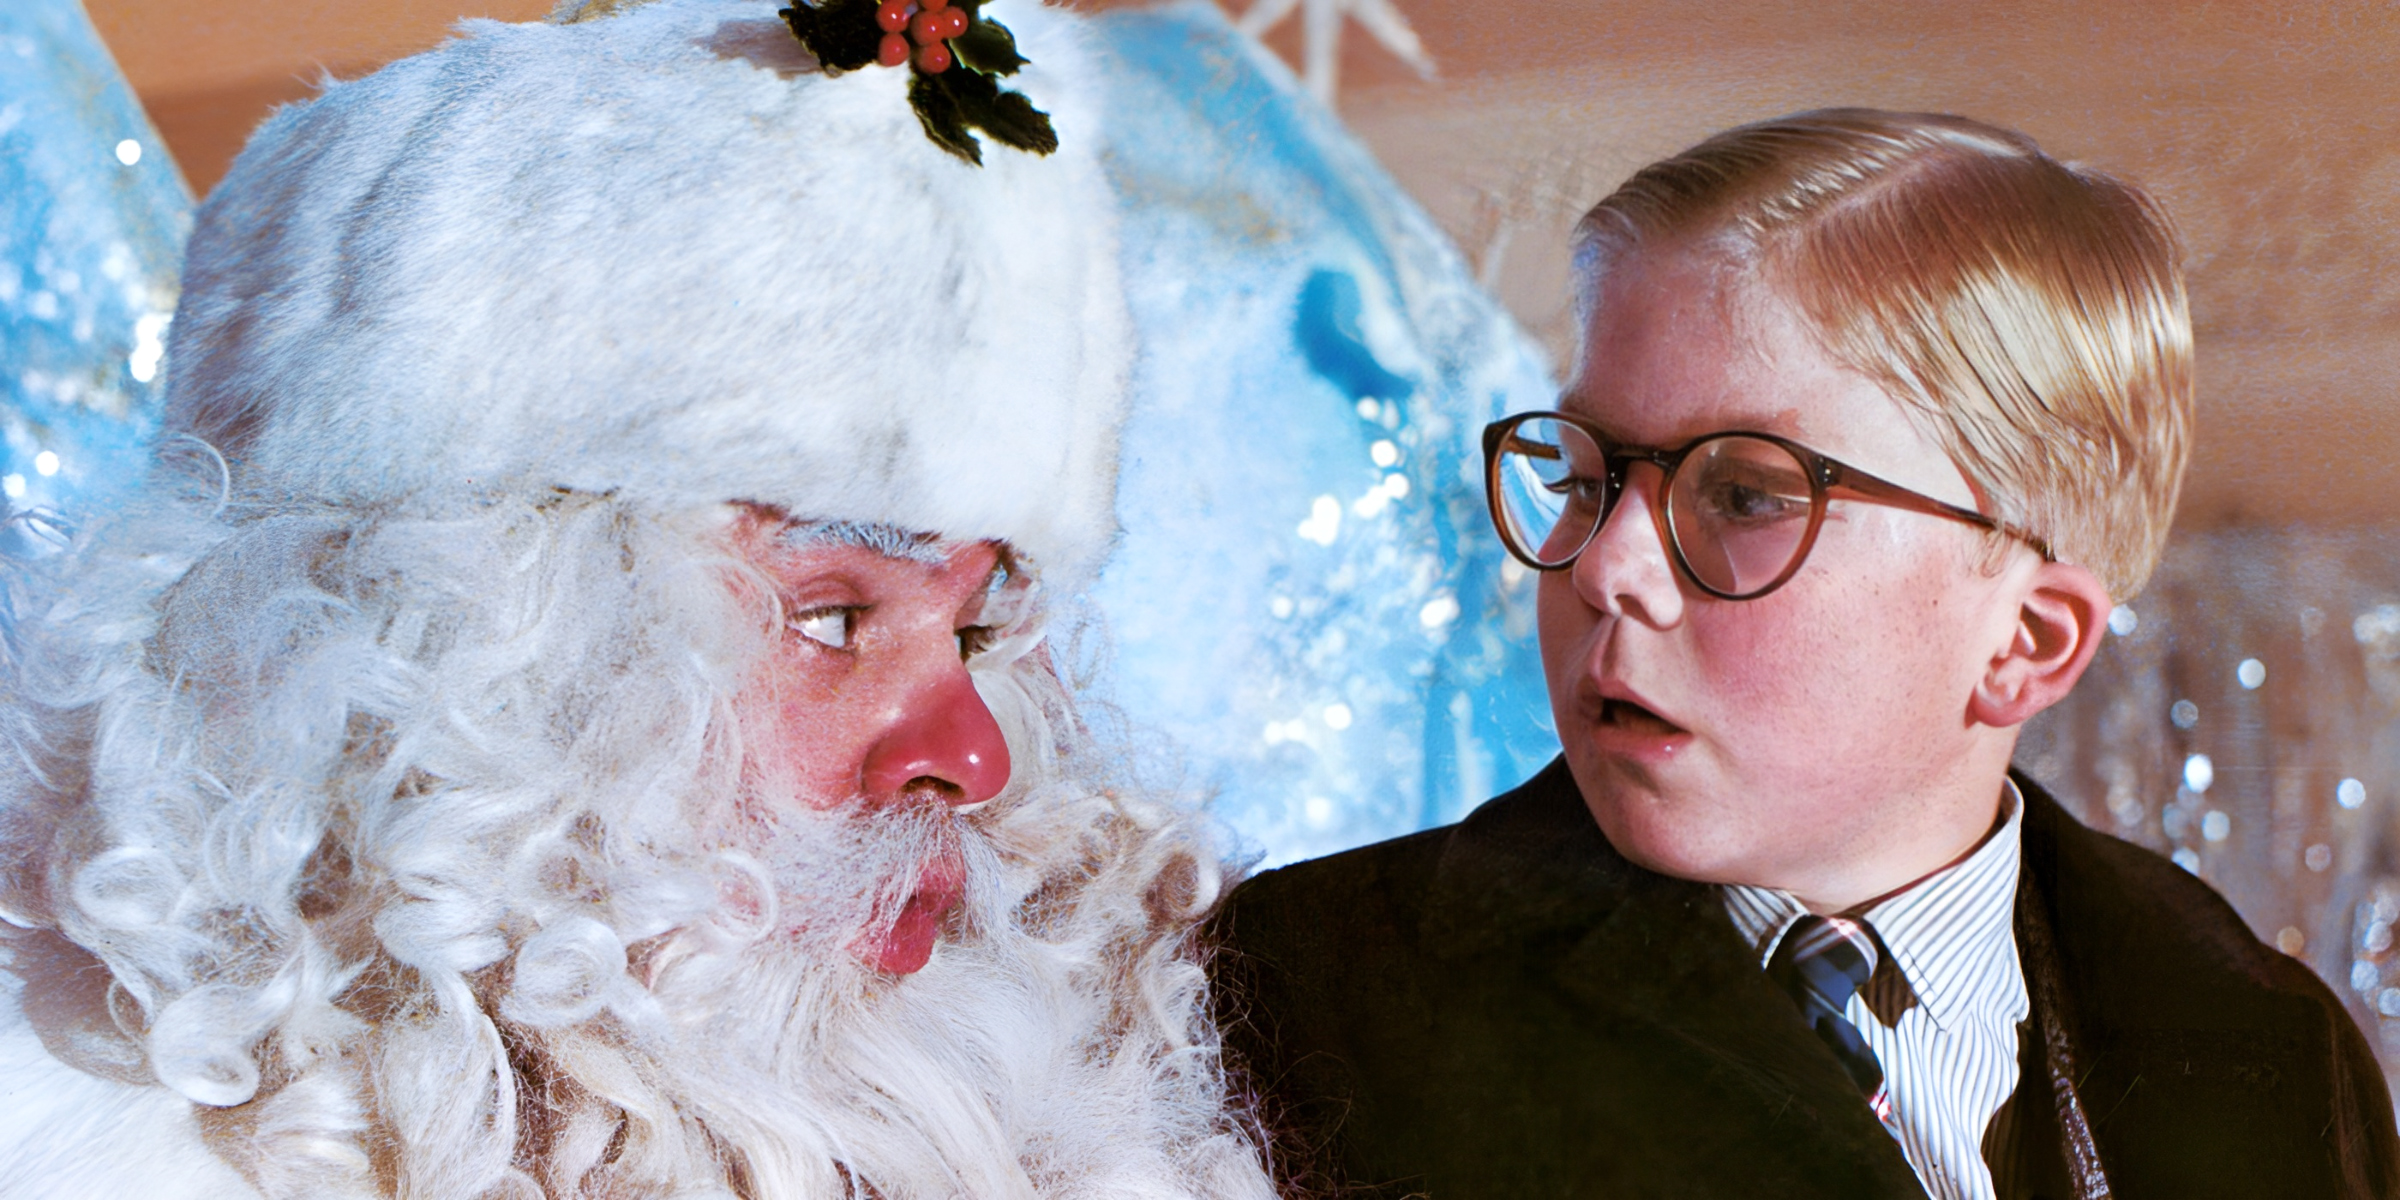 Peter Billingsley in "A Christmas Story" | Source: Getty Images